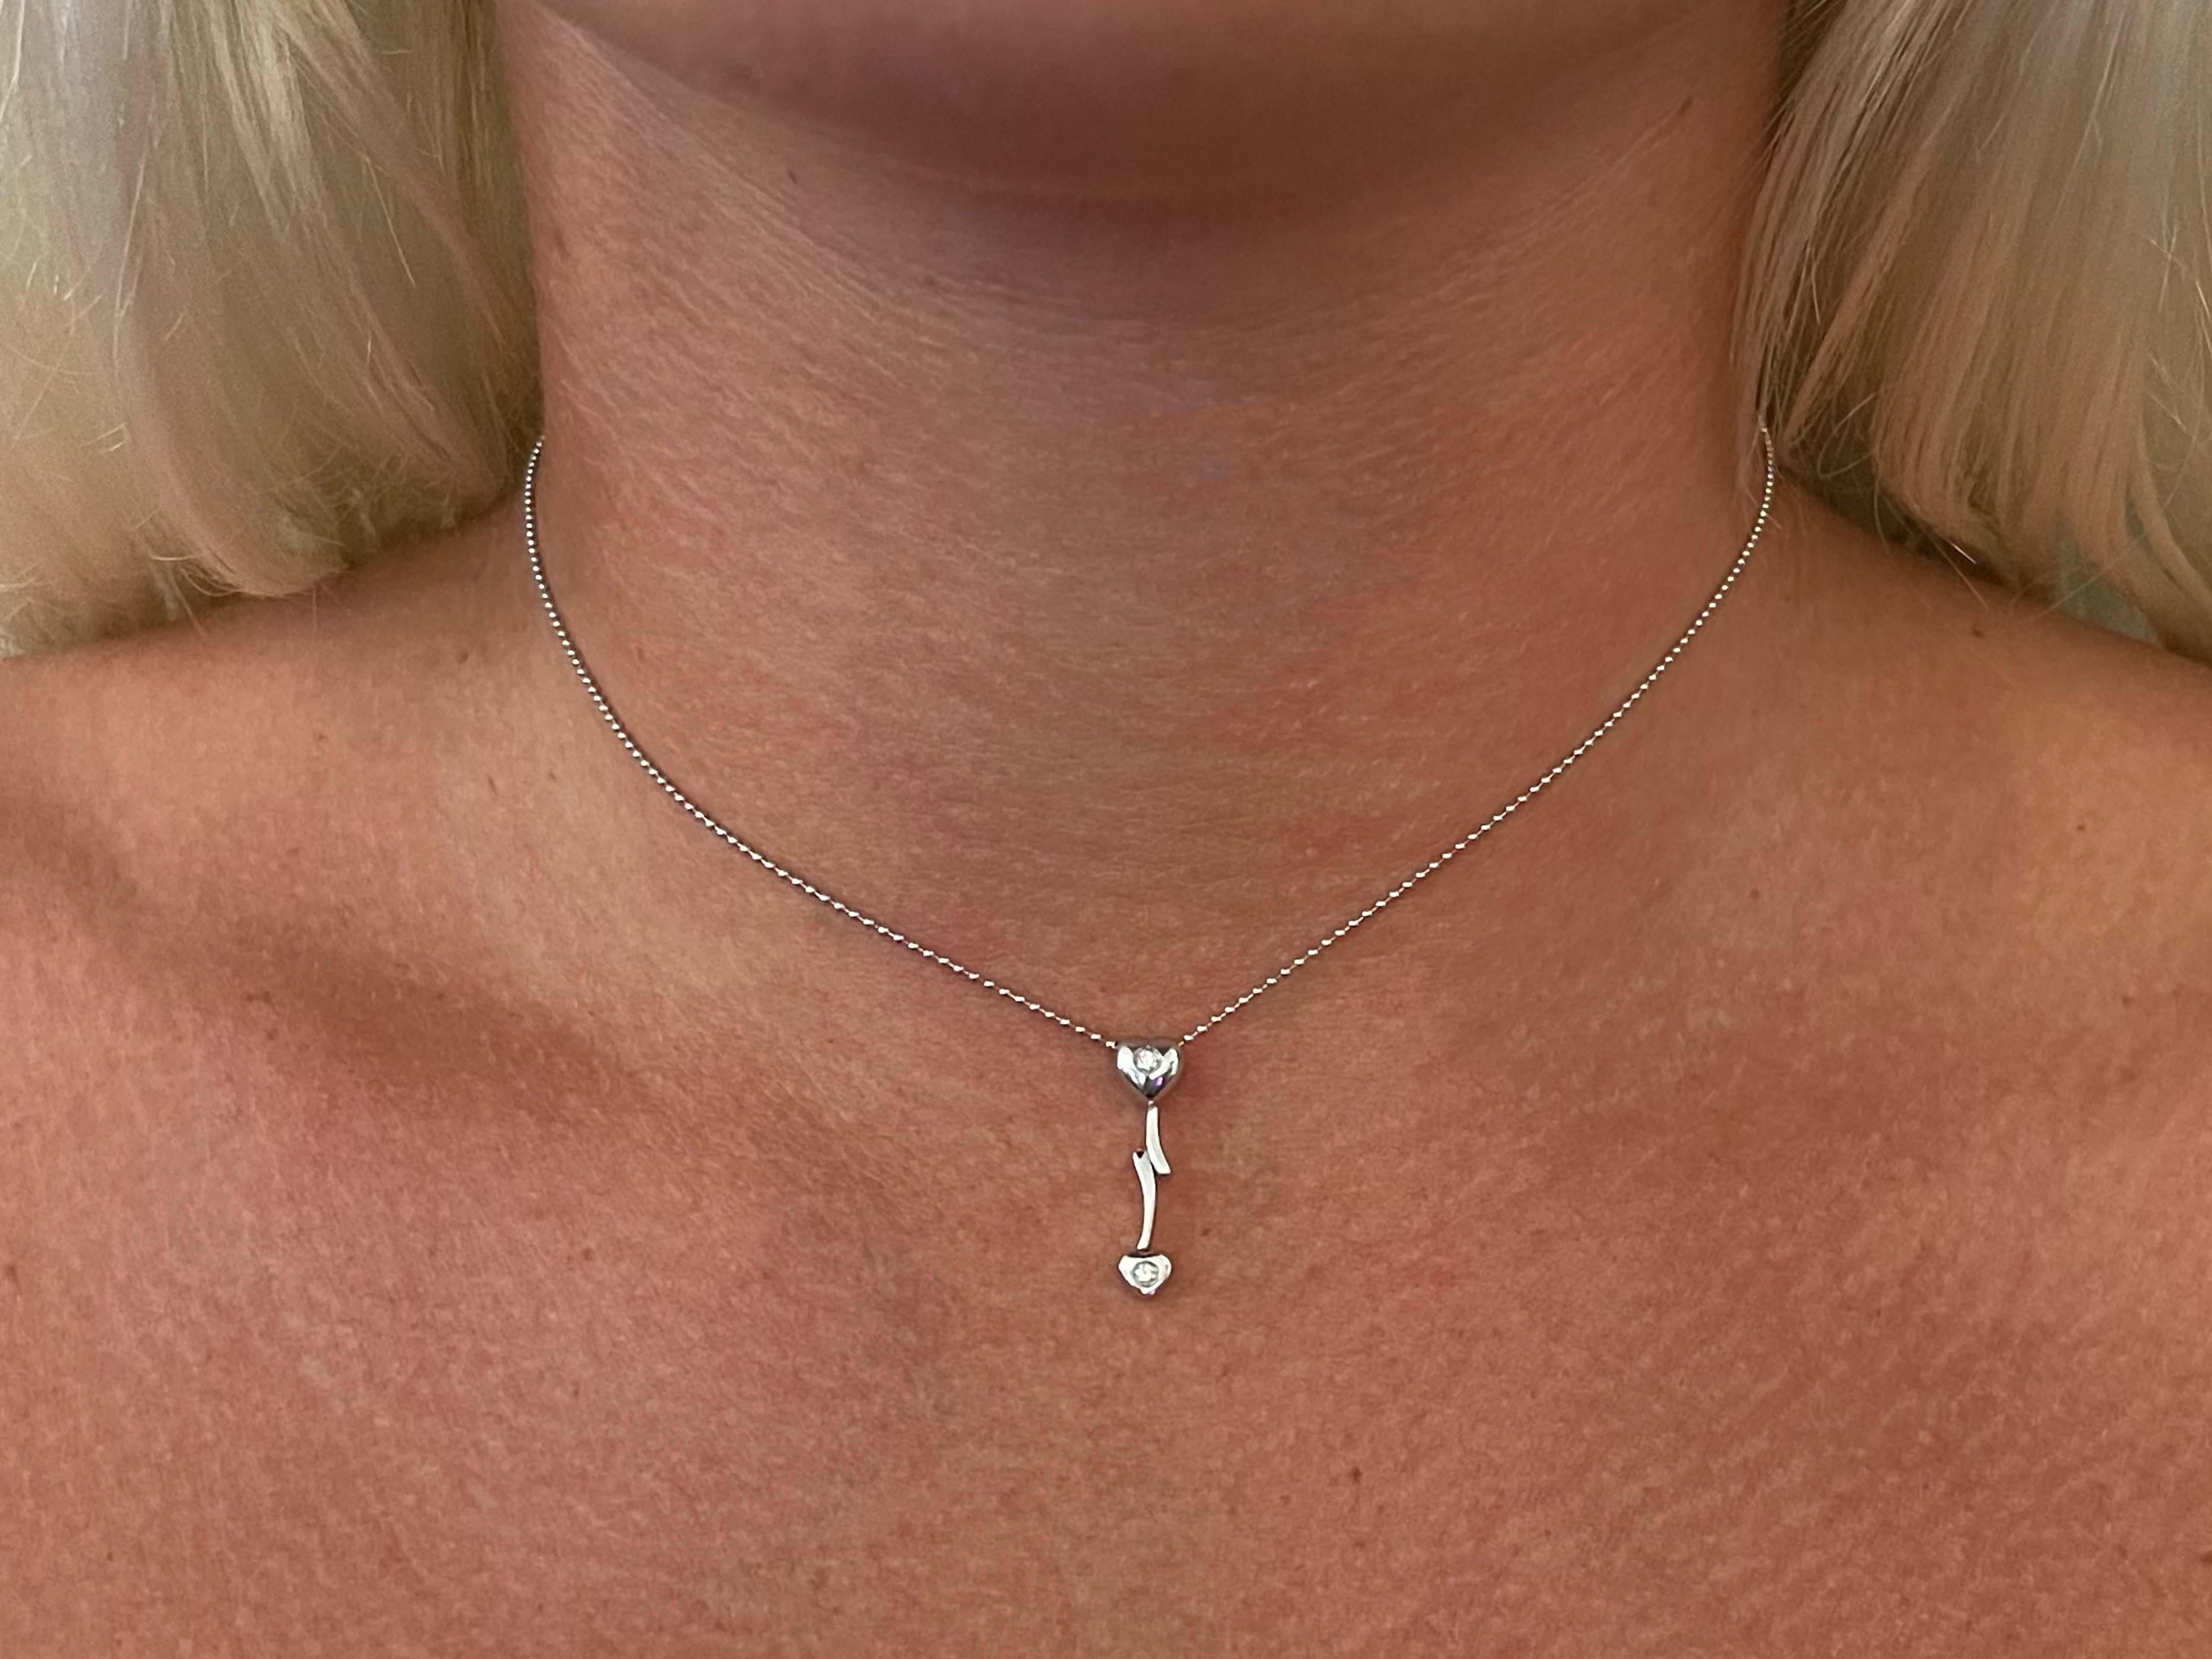 Item Specifications:

Necklace Metal: 14k White Gold

Total Weight: 2.7 Grams

Chain Length: 14